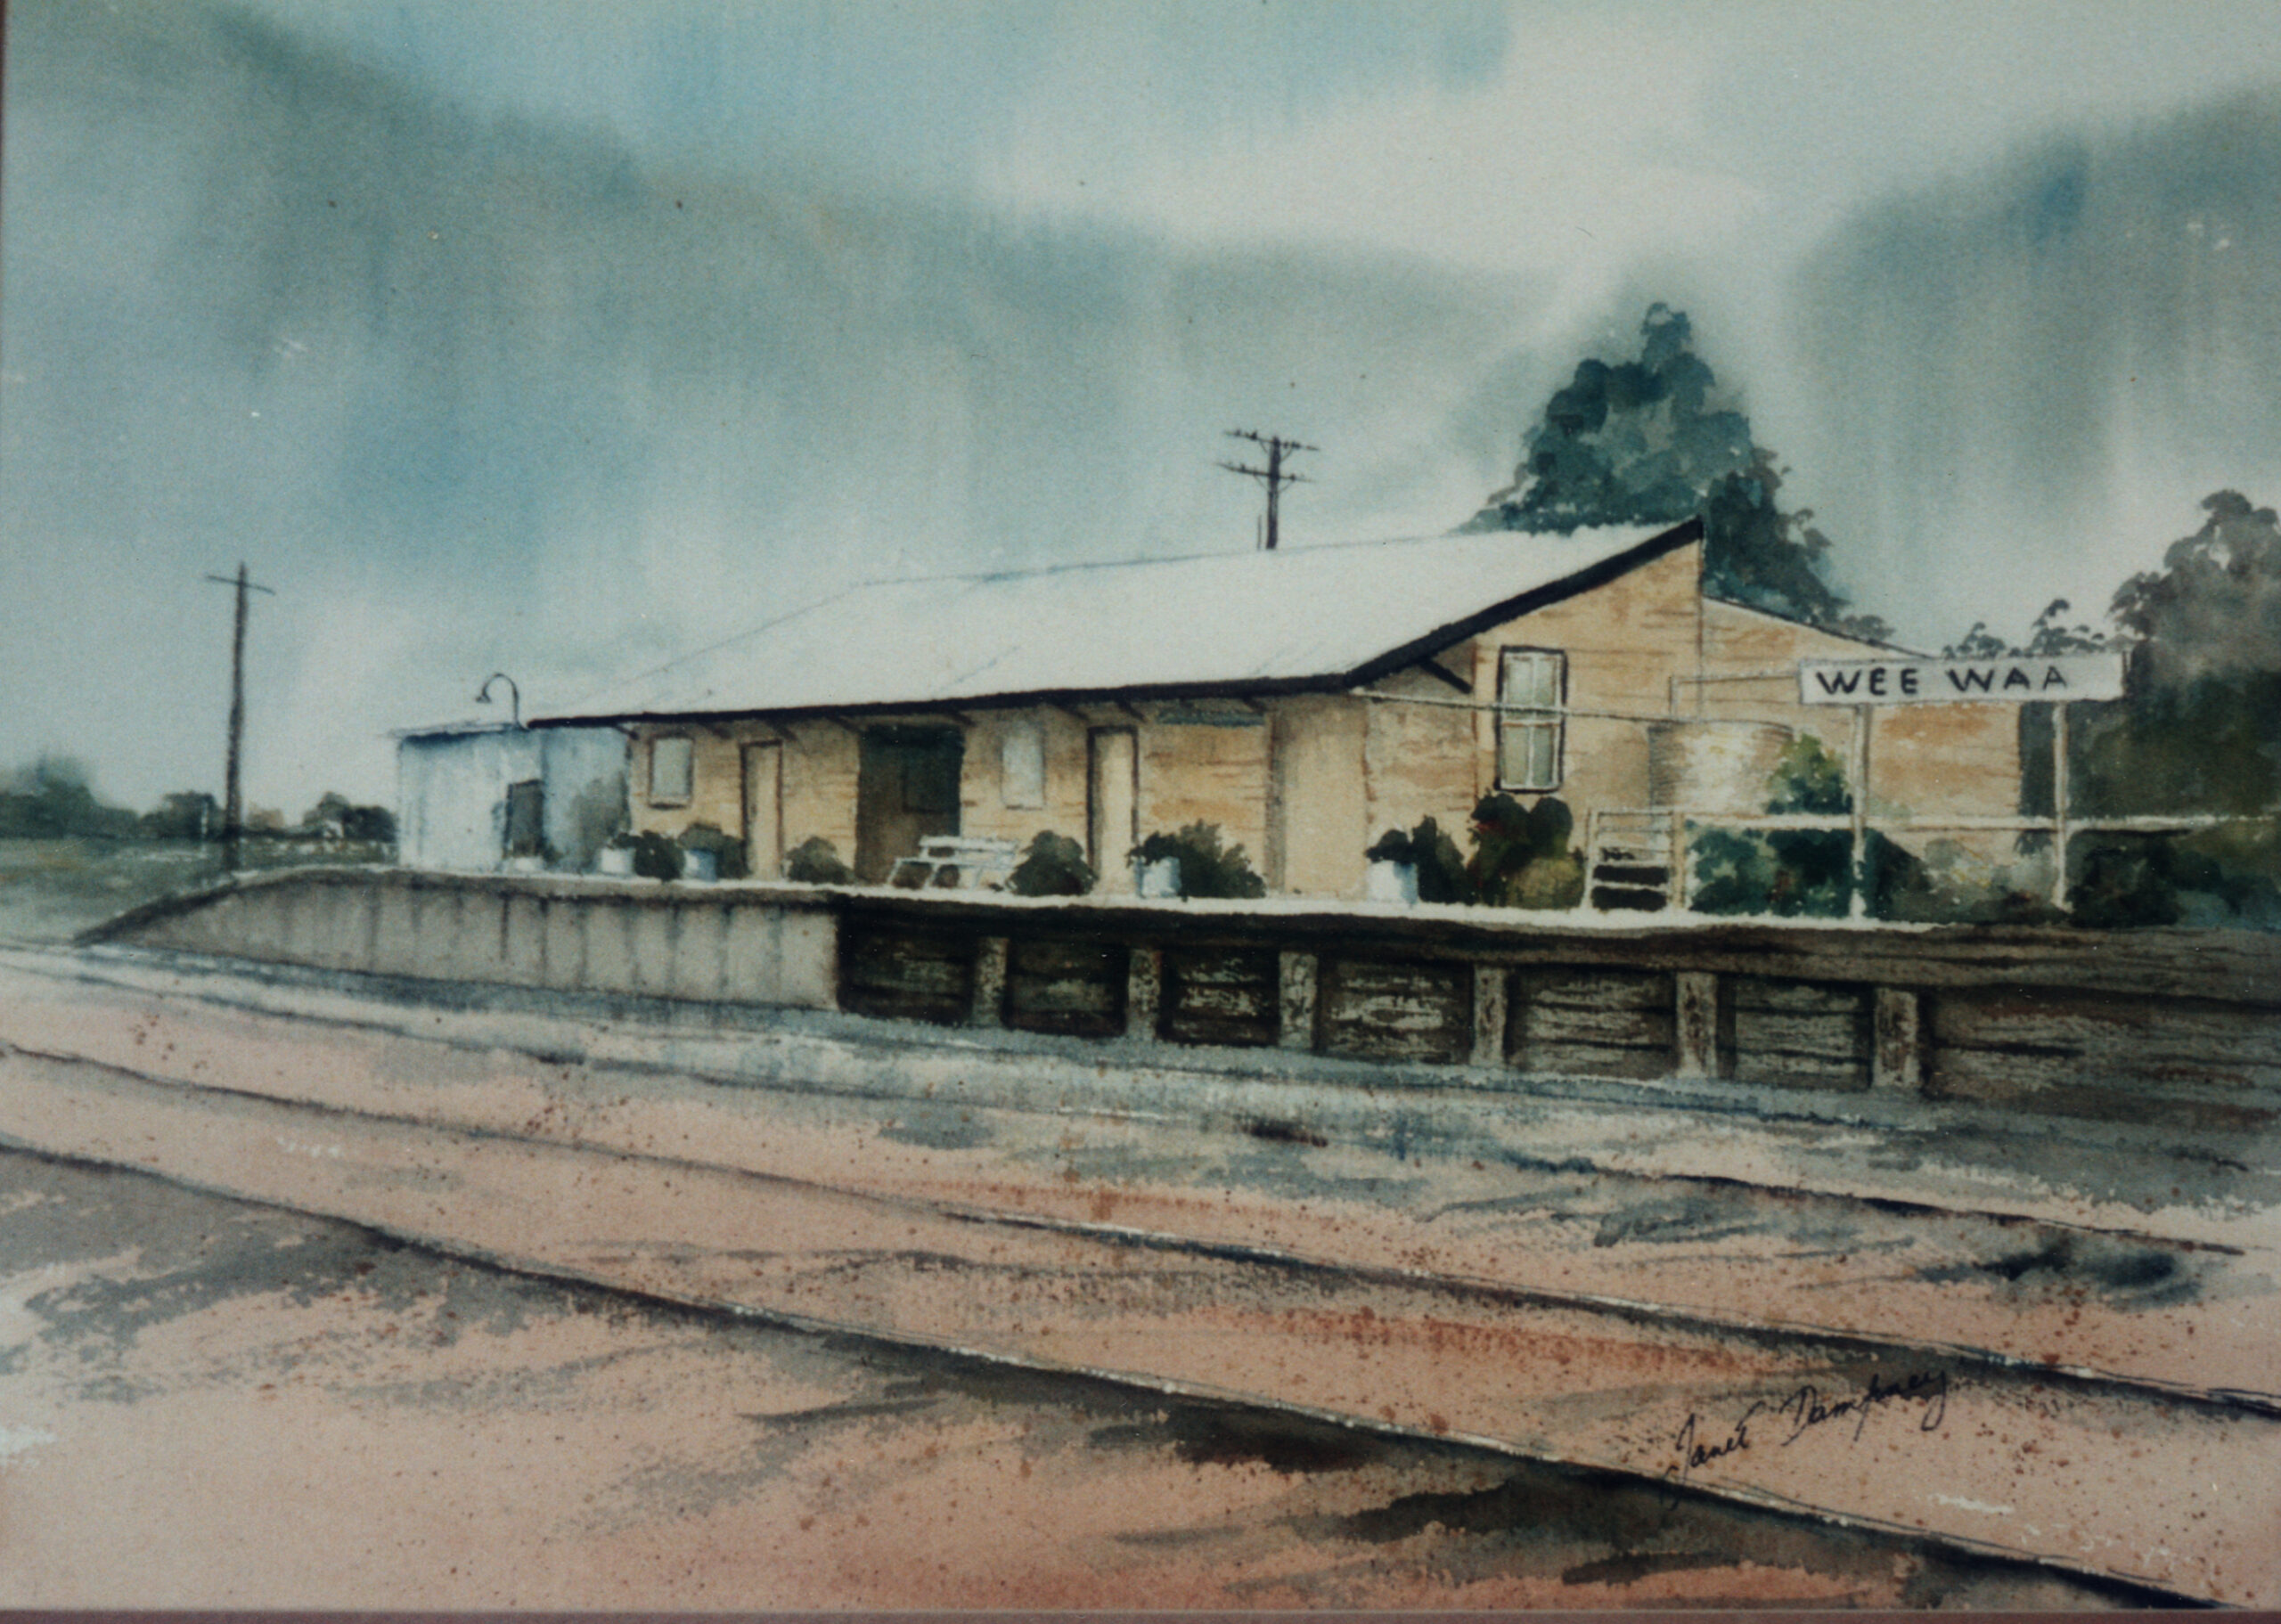 A painting by Janet Dampney of the old Wee Waa Railway Station. She took a photo of the station and did a pen and ink watercolour painting in the 1980s.